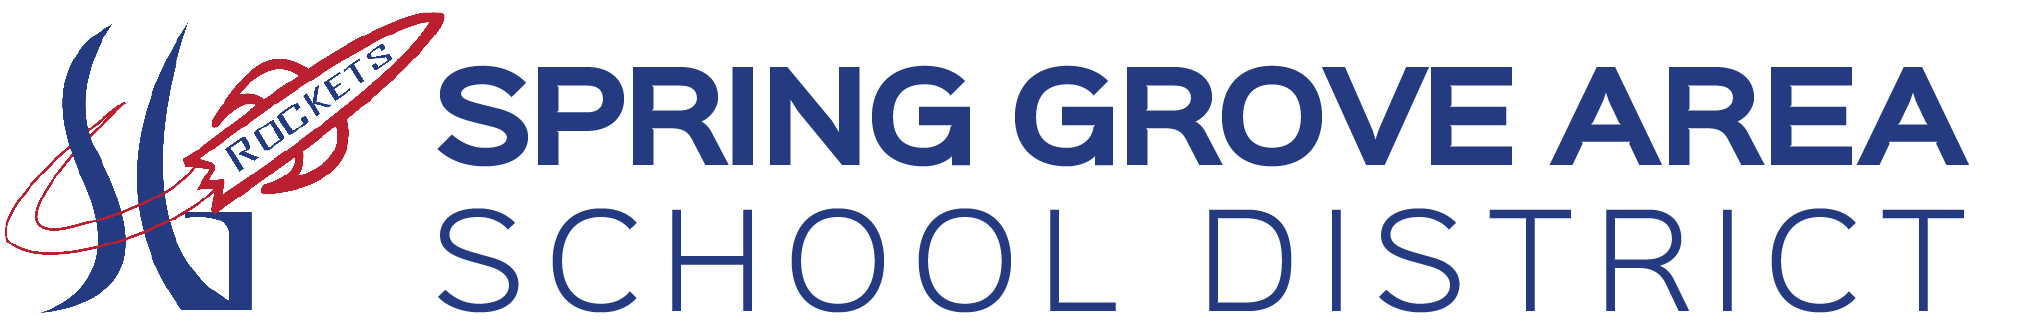 Spring Grove Area School District Homepage